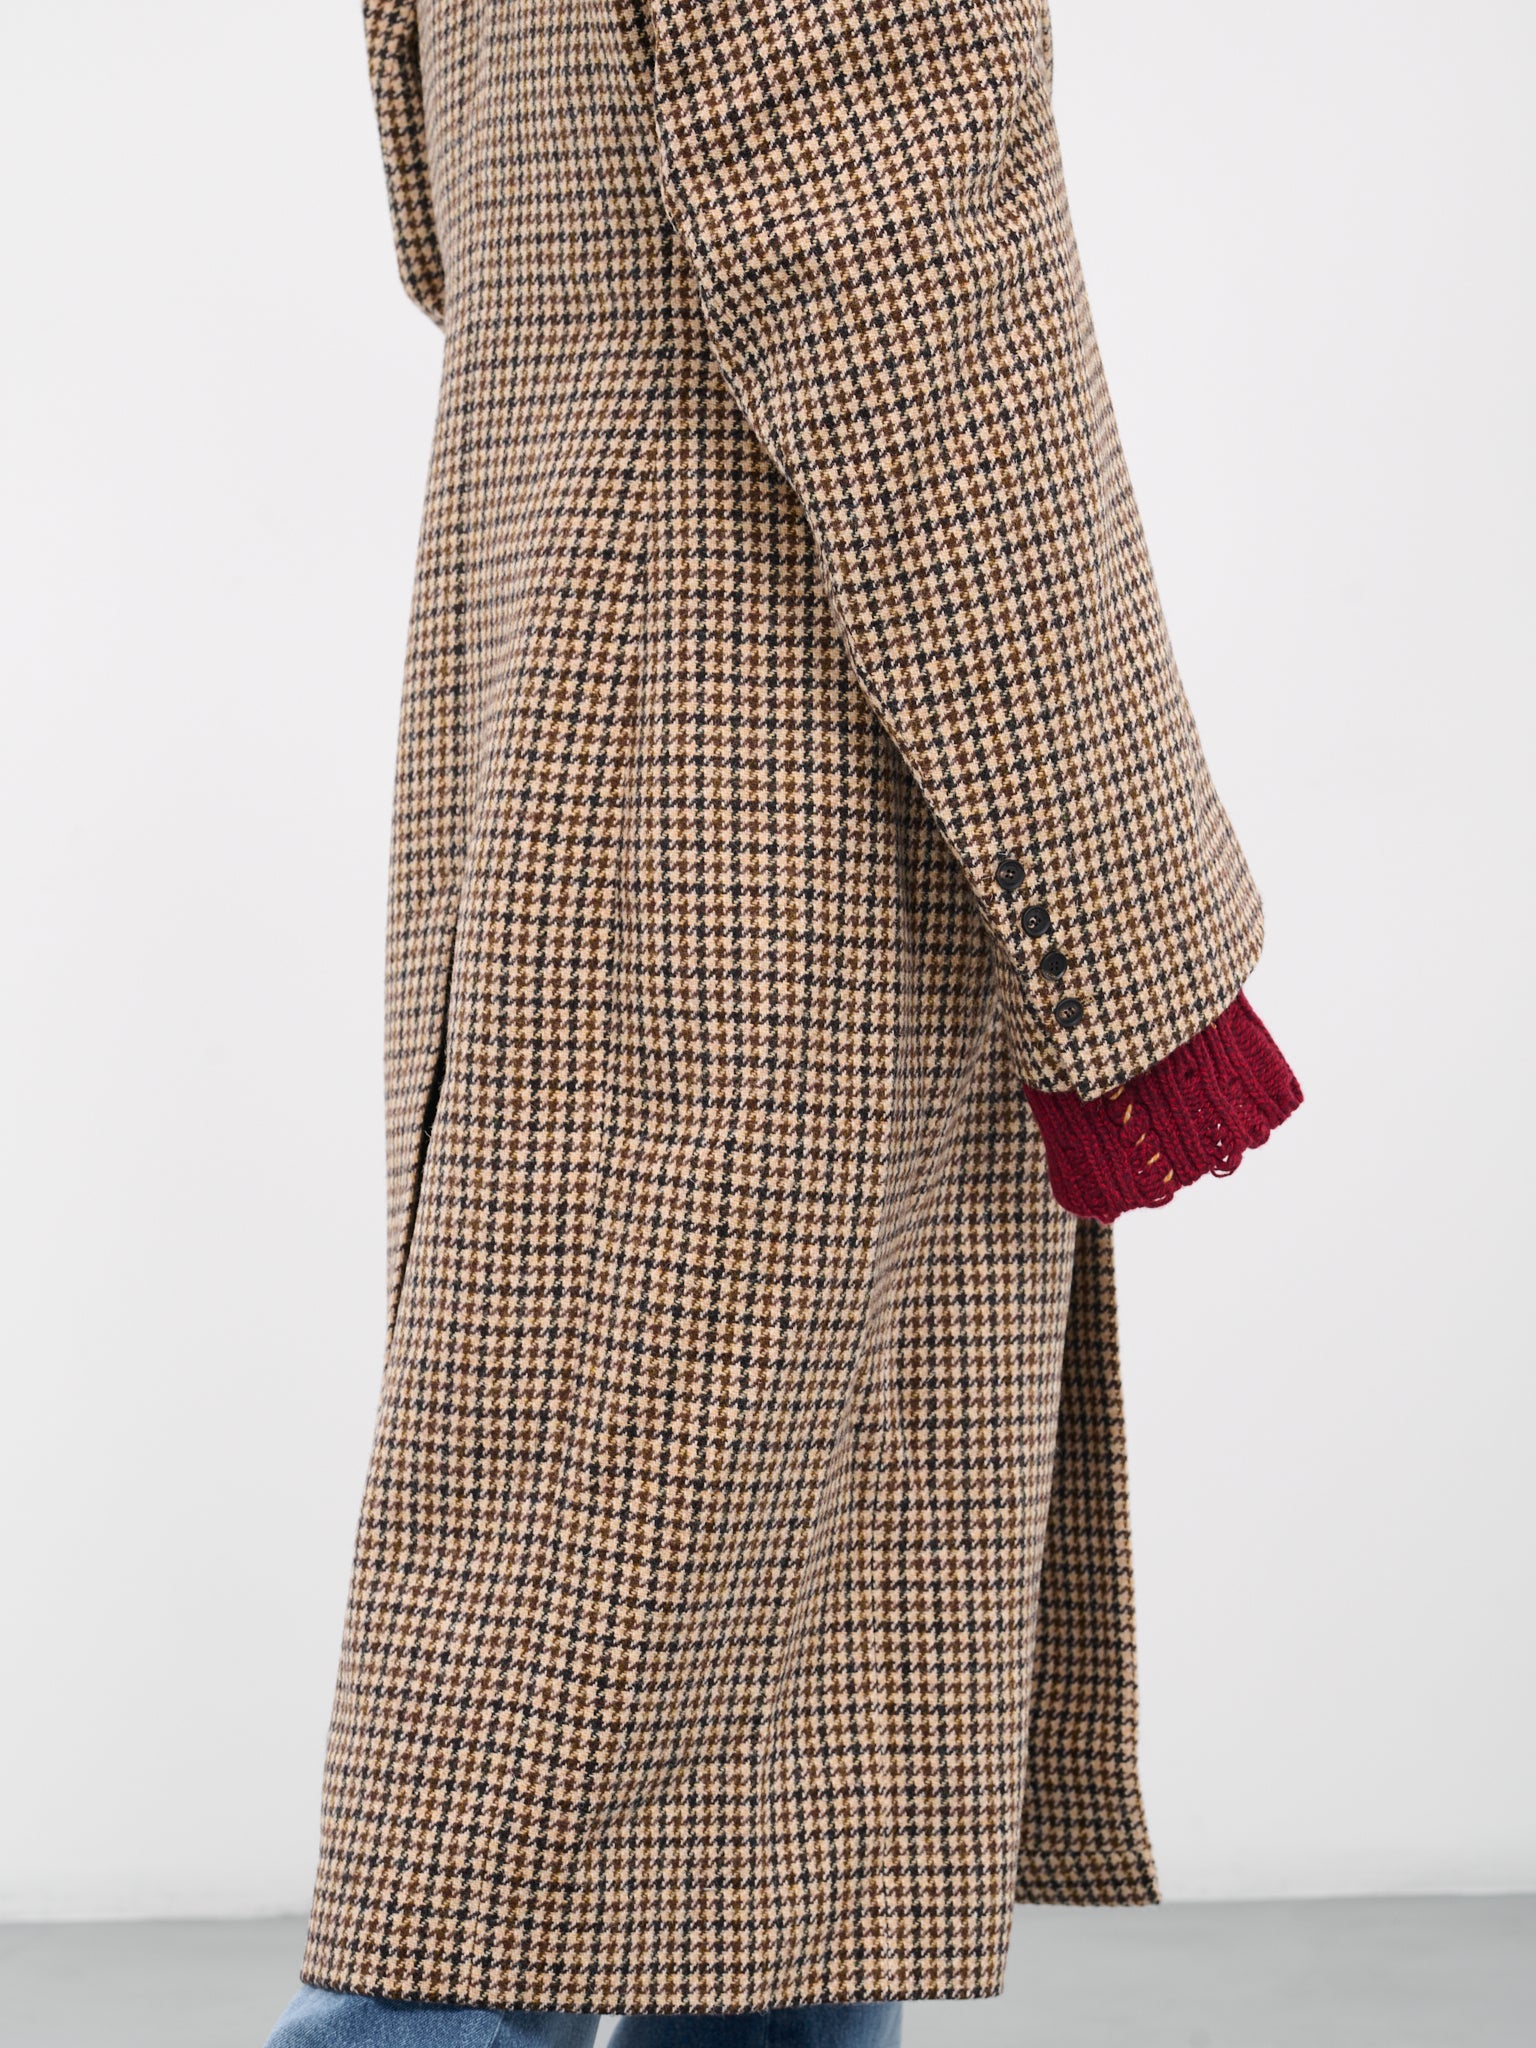 Houndstooth Coat (CO-001-B-HOUNDSTOOTH)